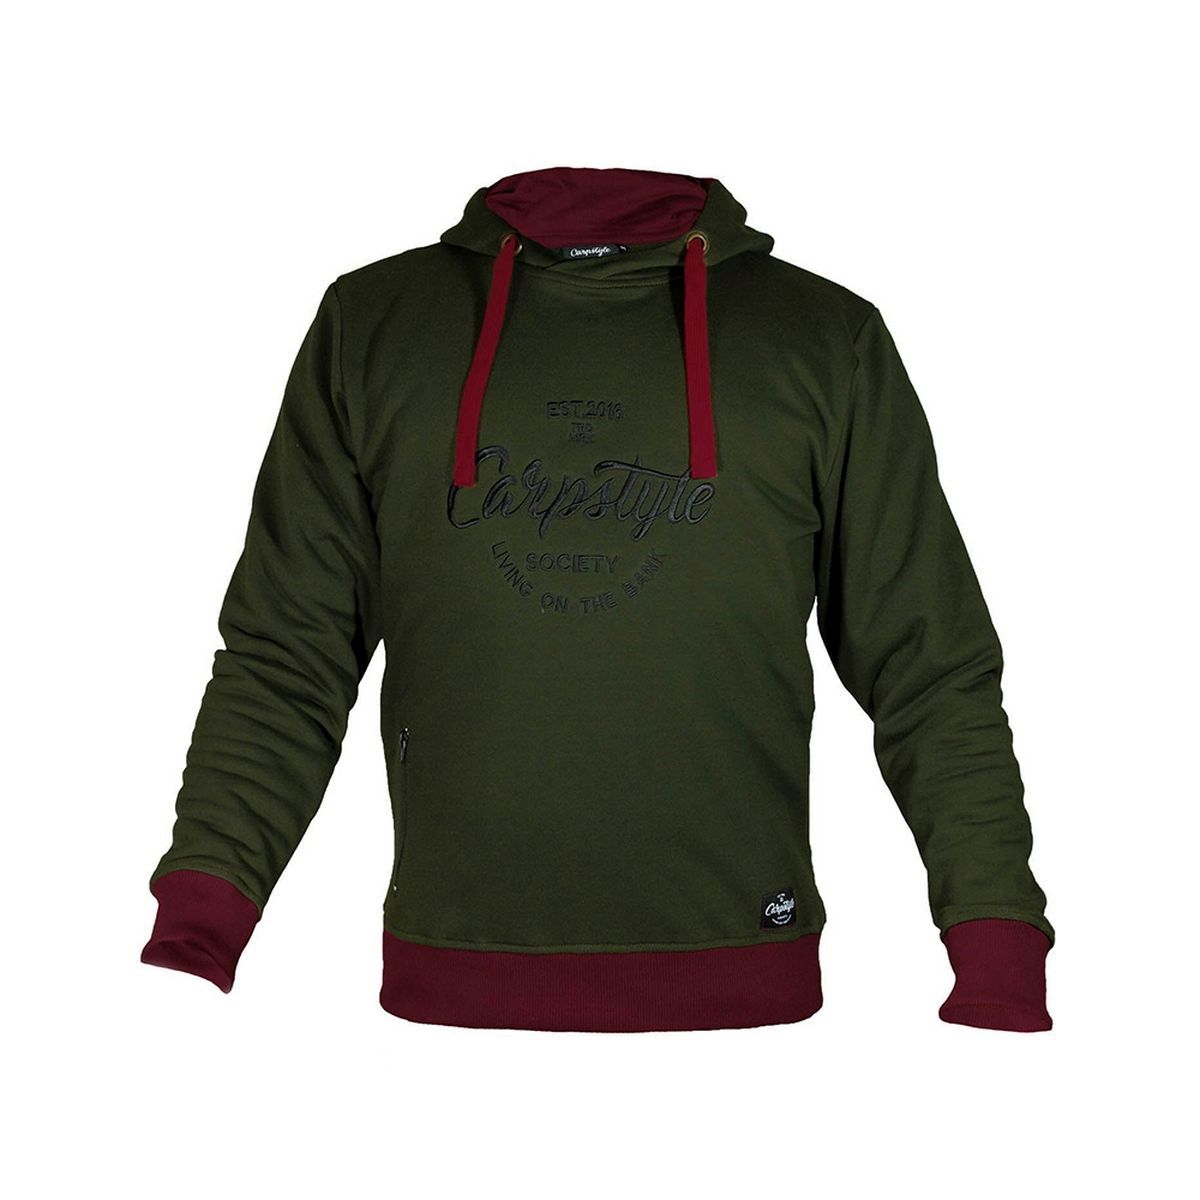 CARPSTYLE GREEN FOREST HOODIE - XL